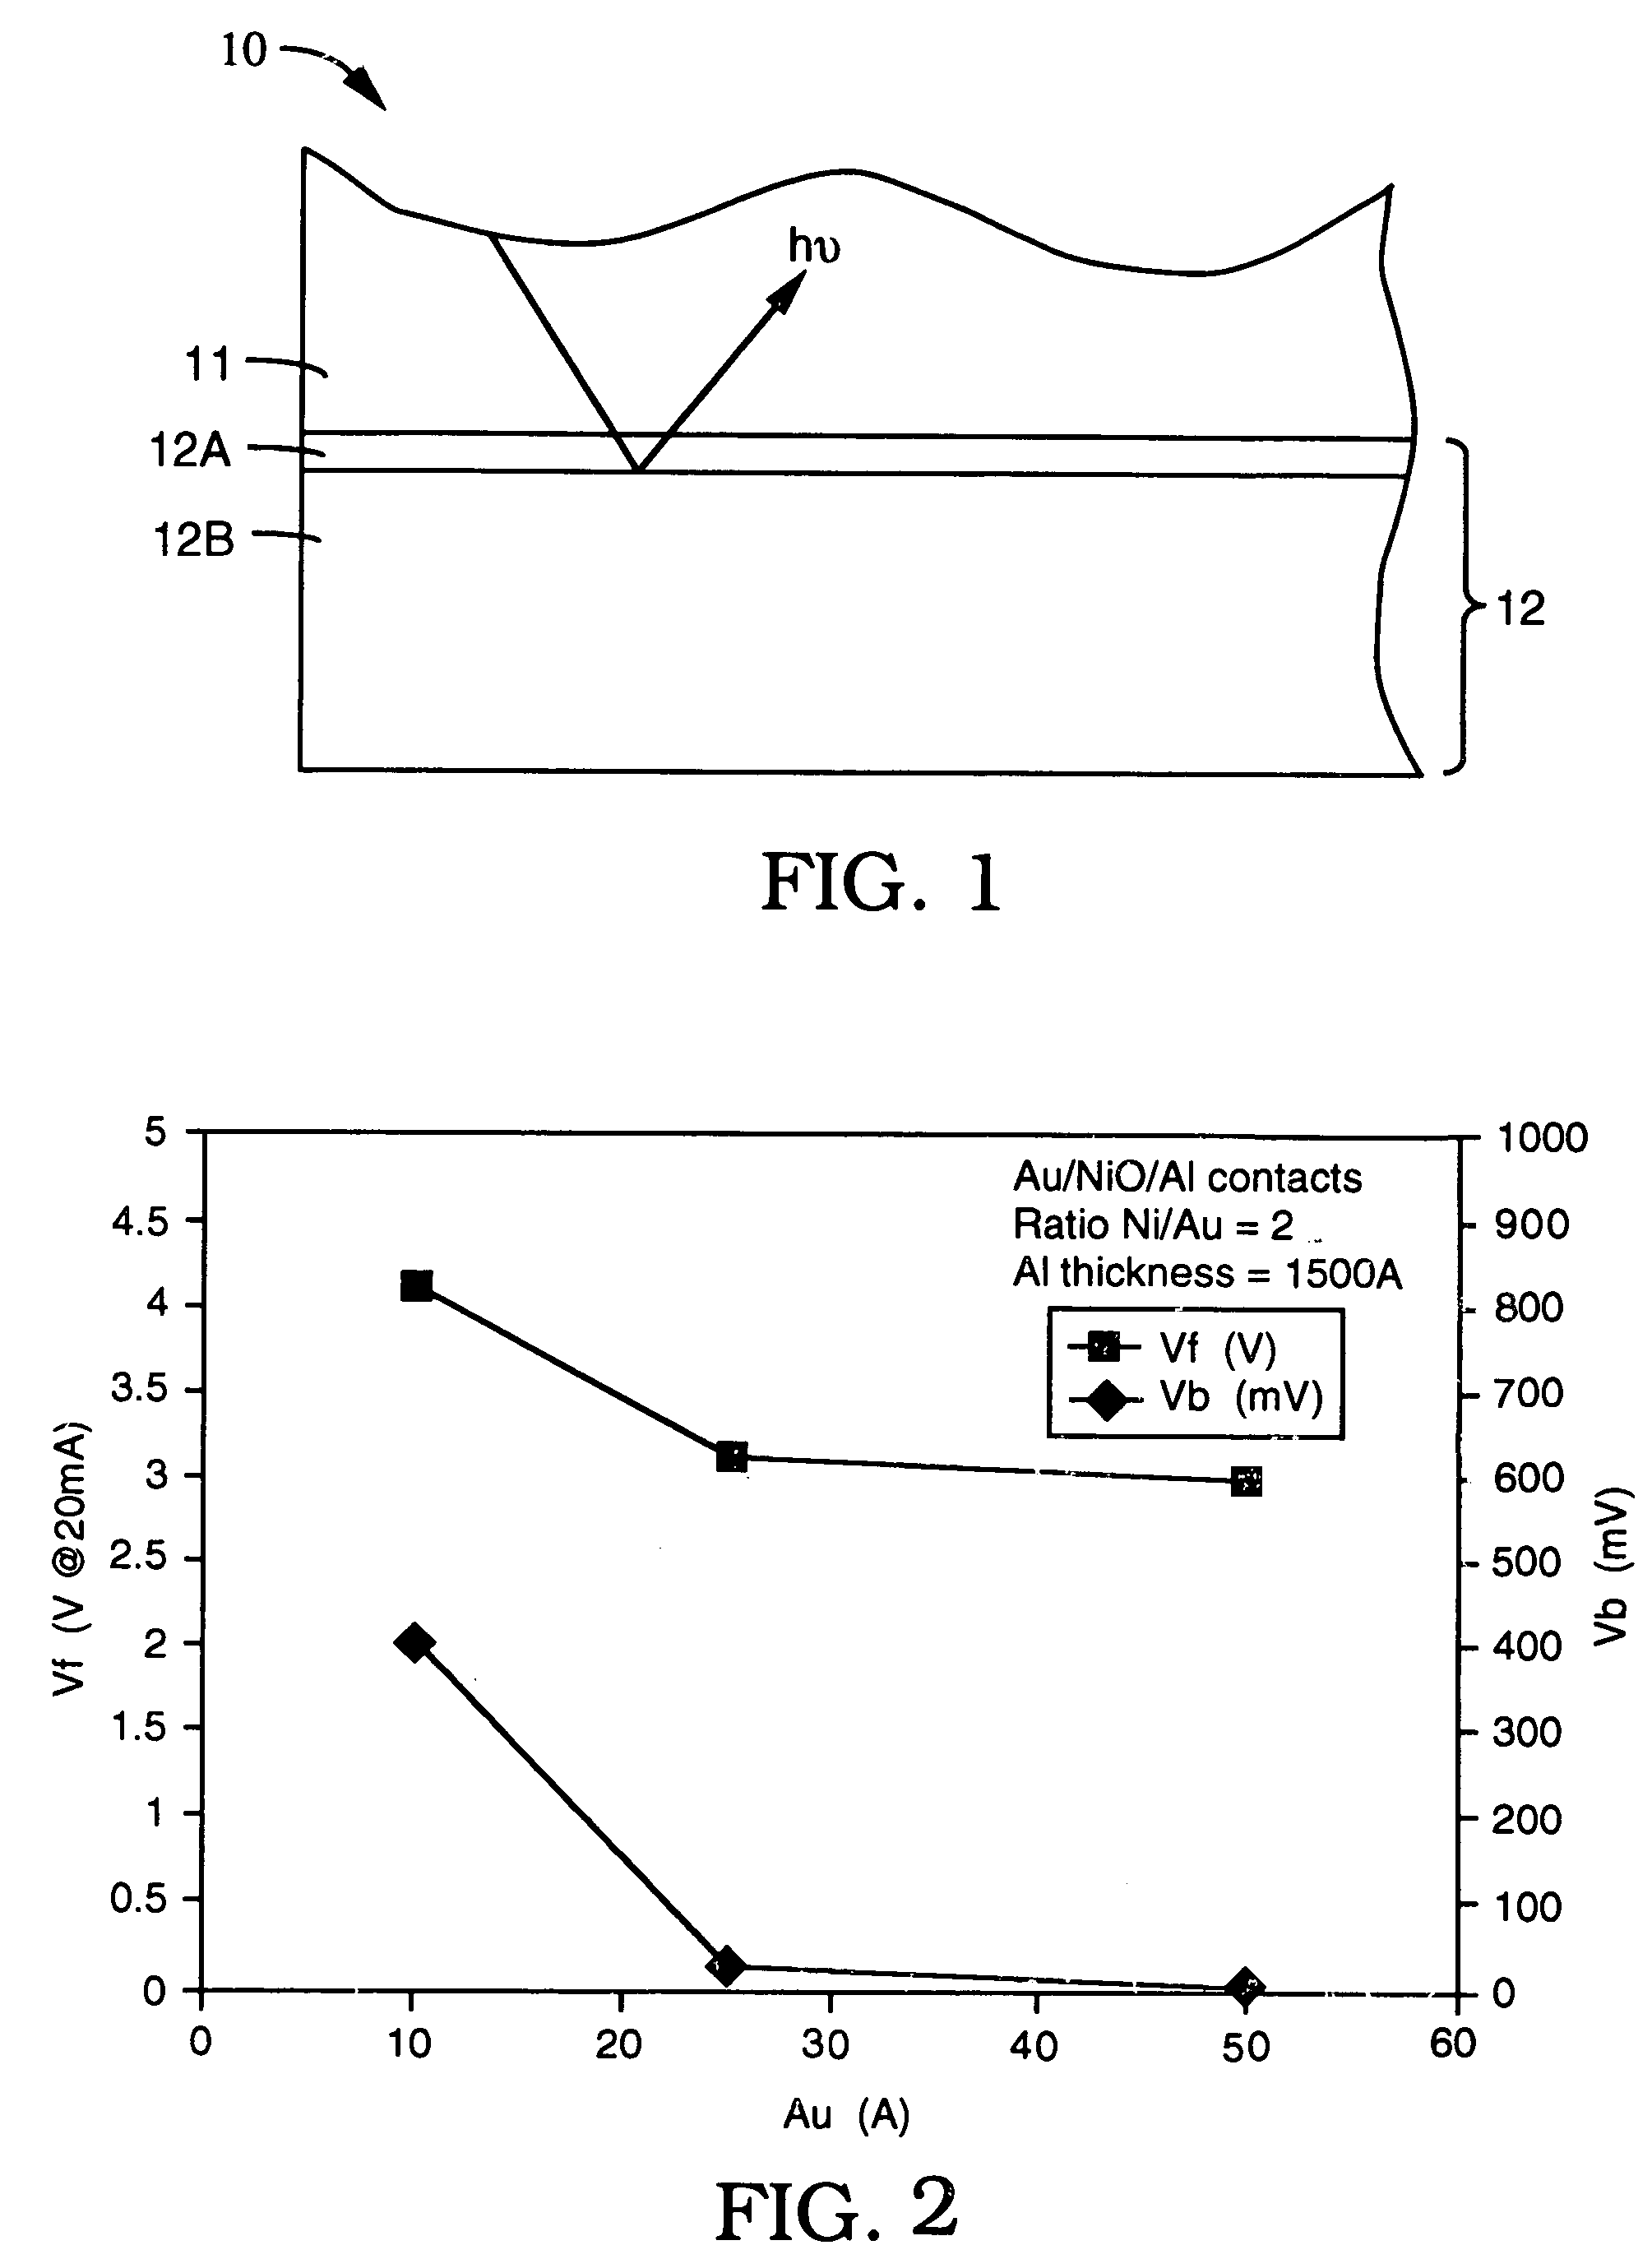 Multi-layer highly reflective ohmic contacts for semiconductor devices